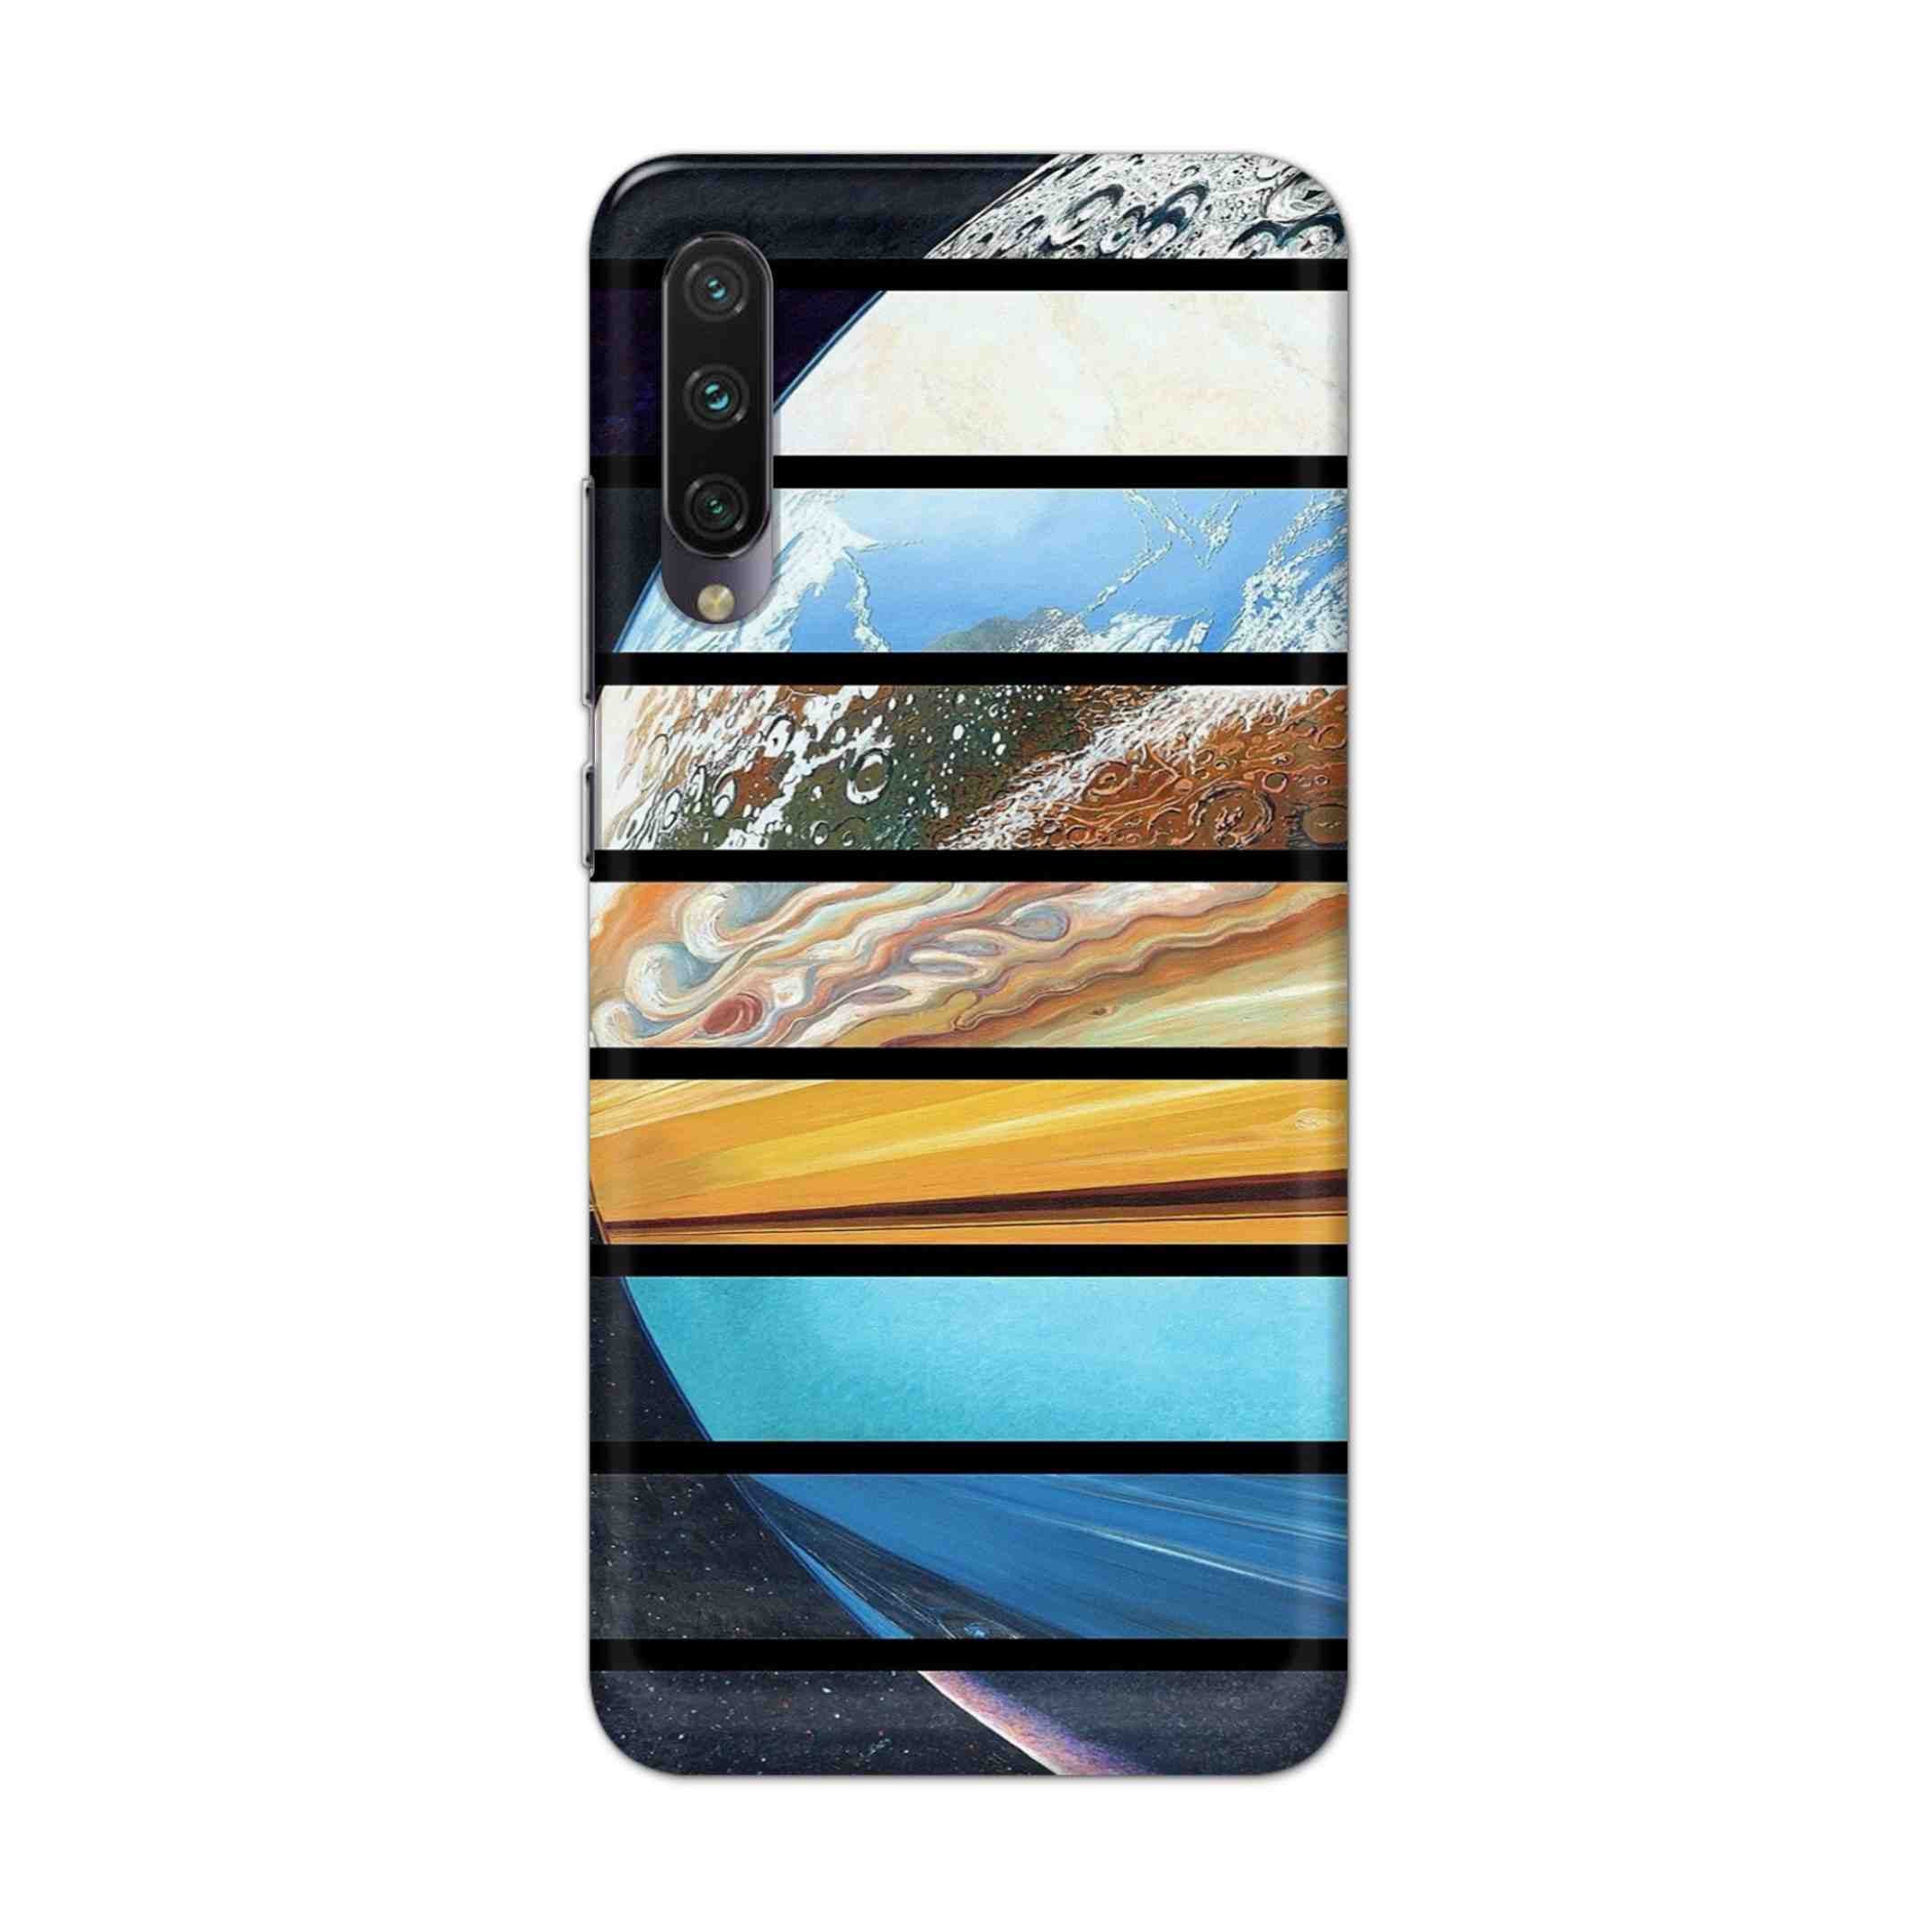 Buy Colourful Earth Hard Back Mobile Phone Case Cover For Xiaomi Mi A3 Online